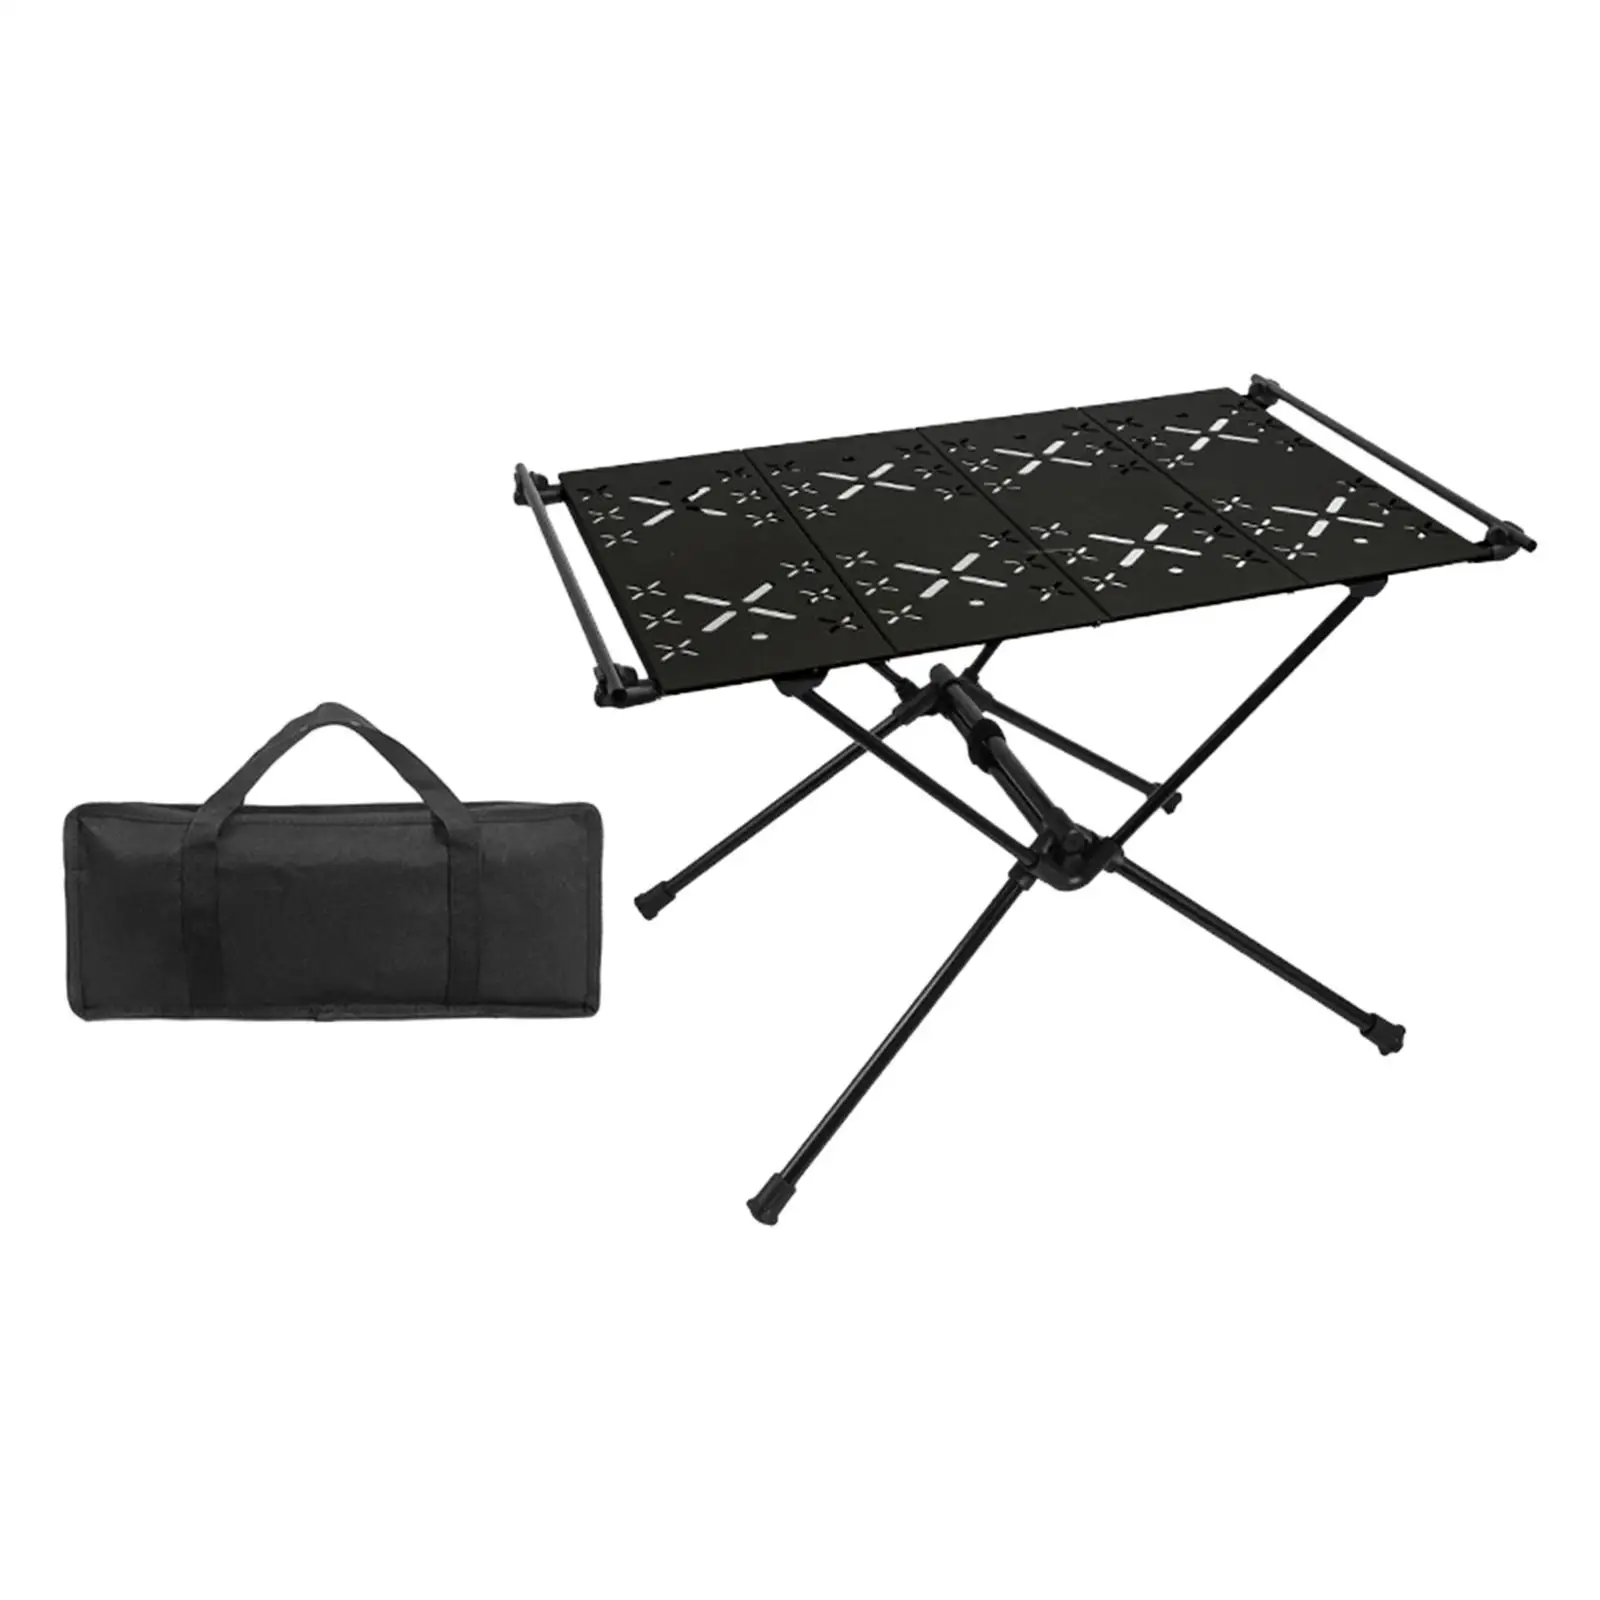 Foldable Camping Table with Storage Bag Outdoor Foldable Table Beach Table Camping Desk for Hiking Backyard Garden